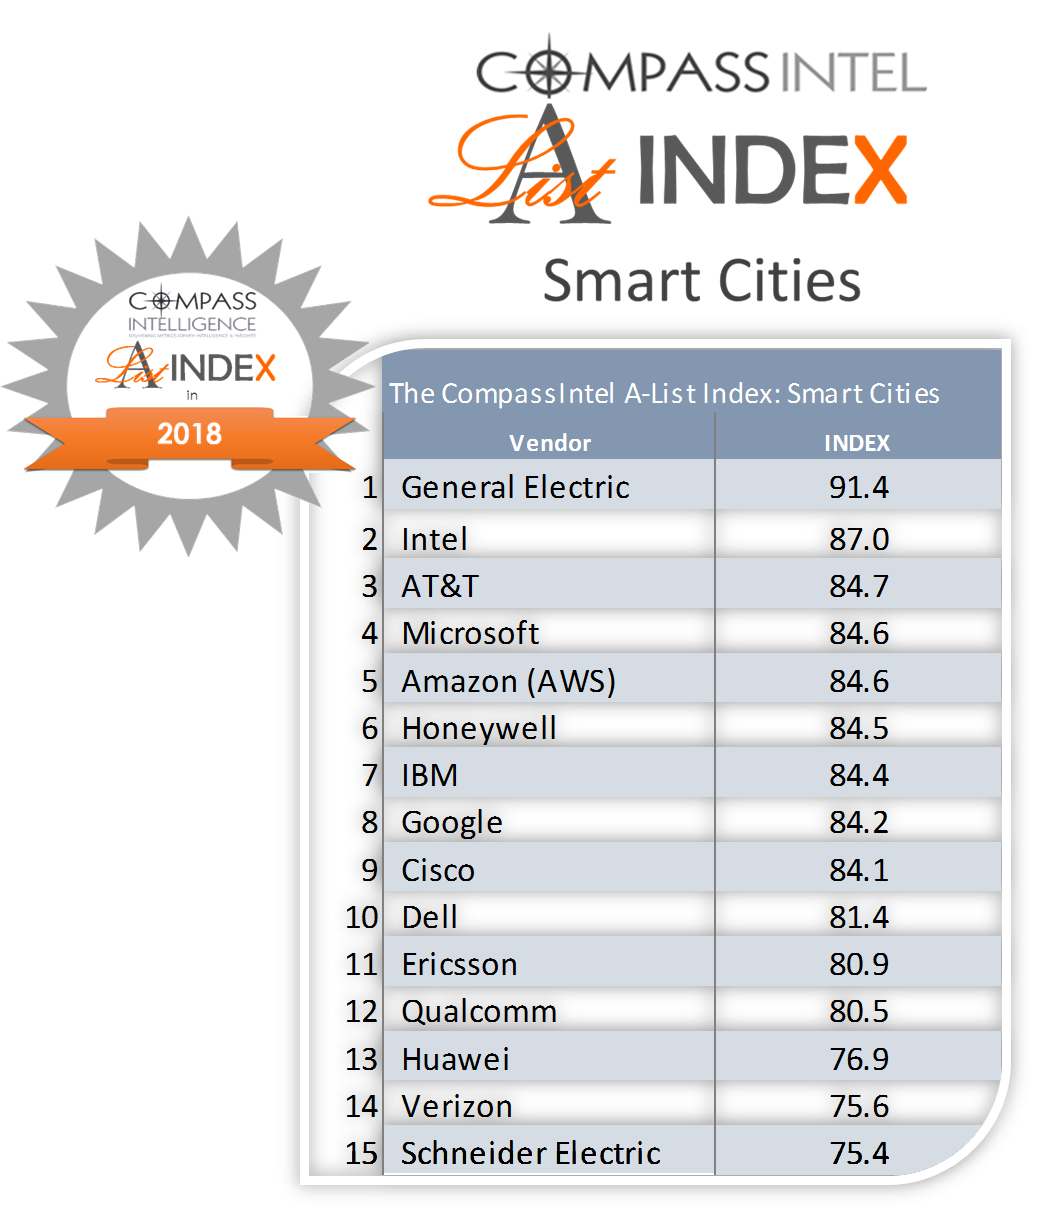 CompassIntel A-List Index in Smart Cities